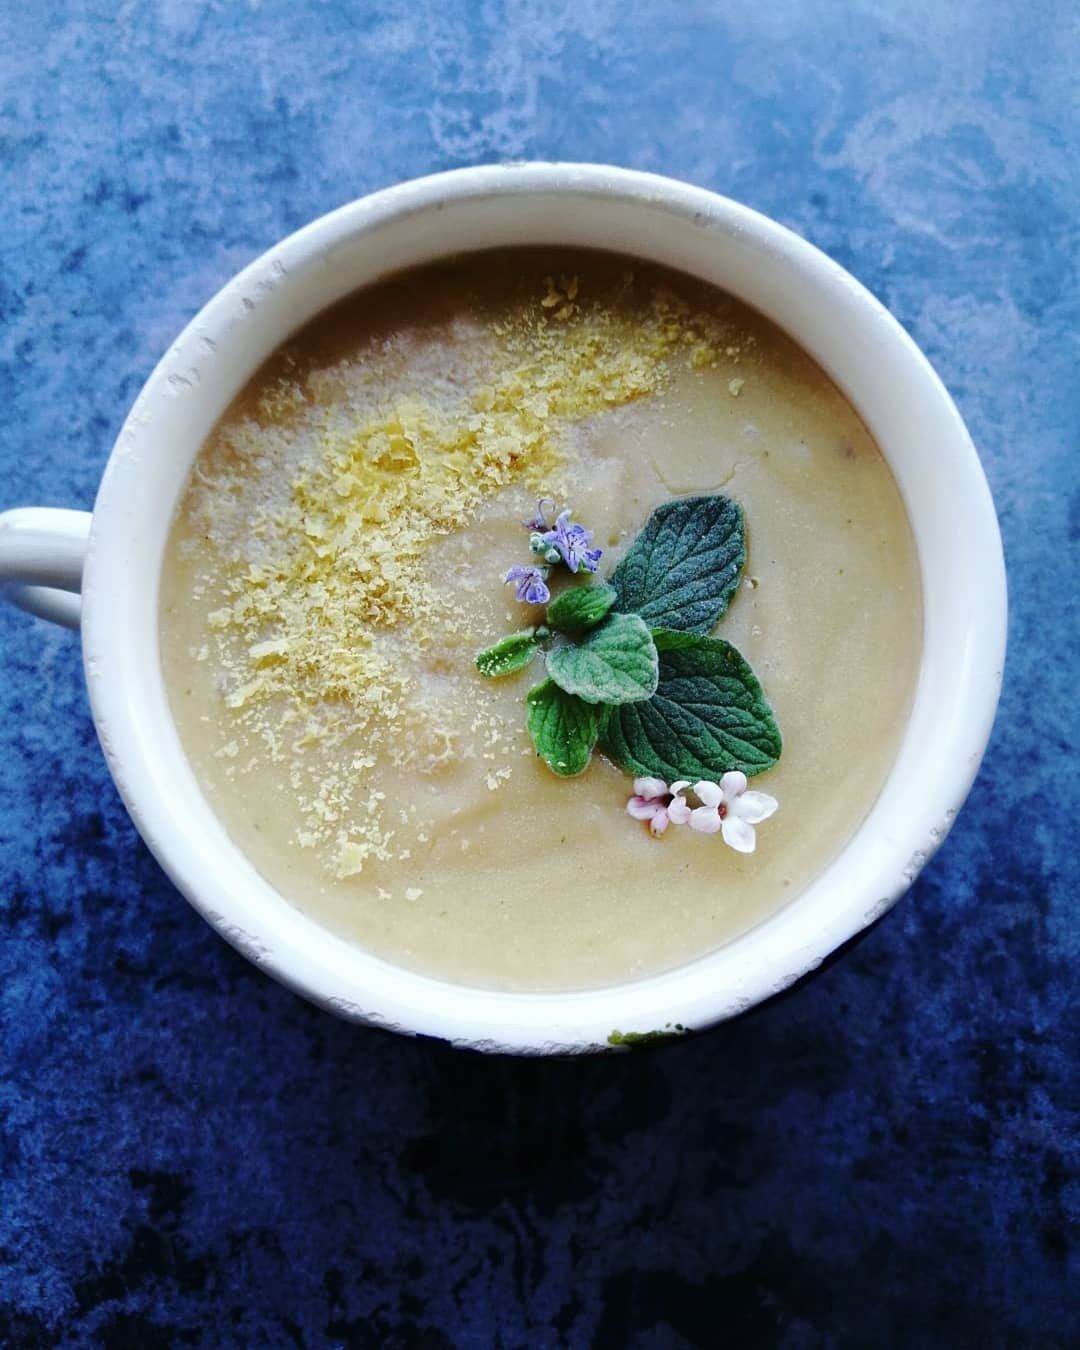 creamy lentil soup with oregano and nutritional yeast garnish